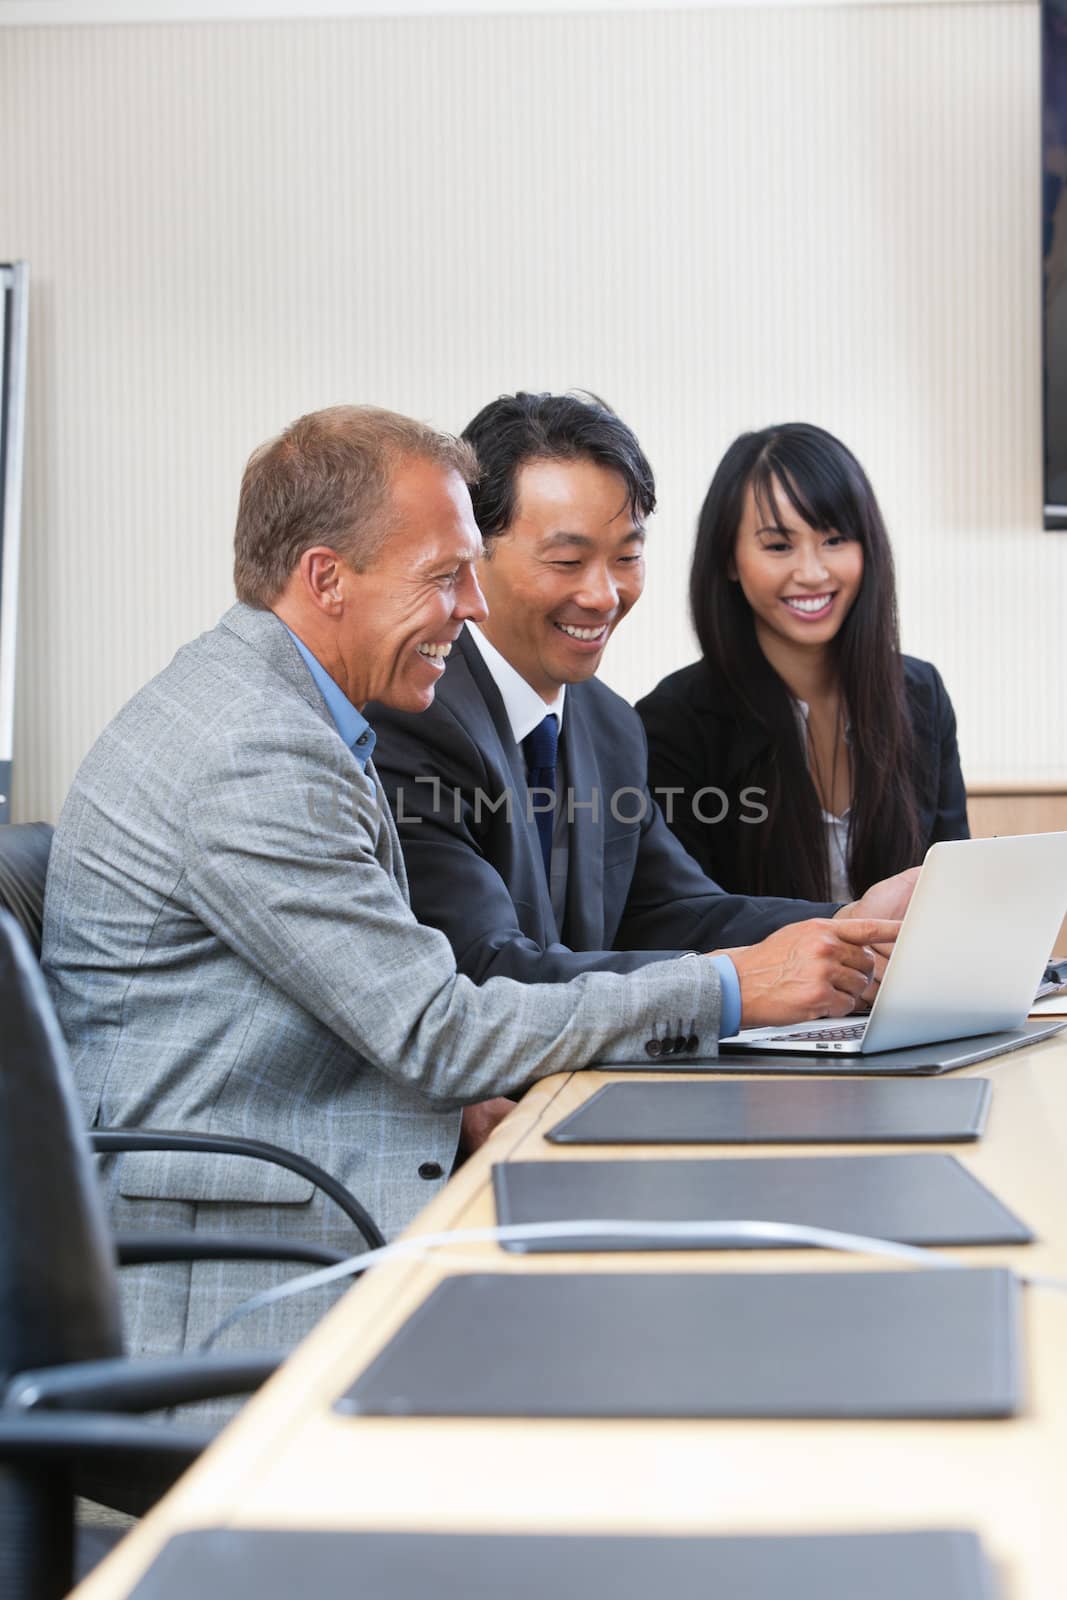 Smiling business people laughing while looking at laptop